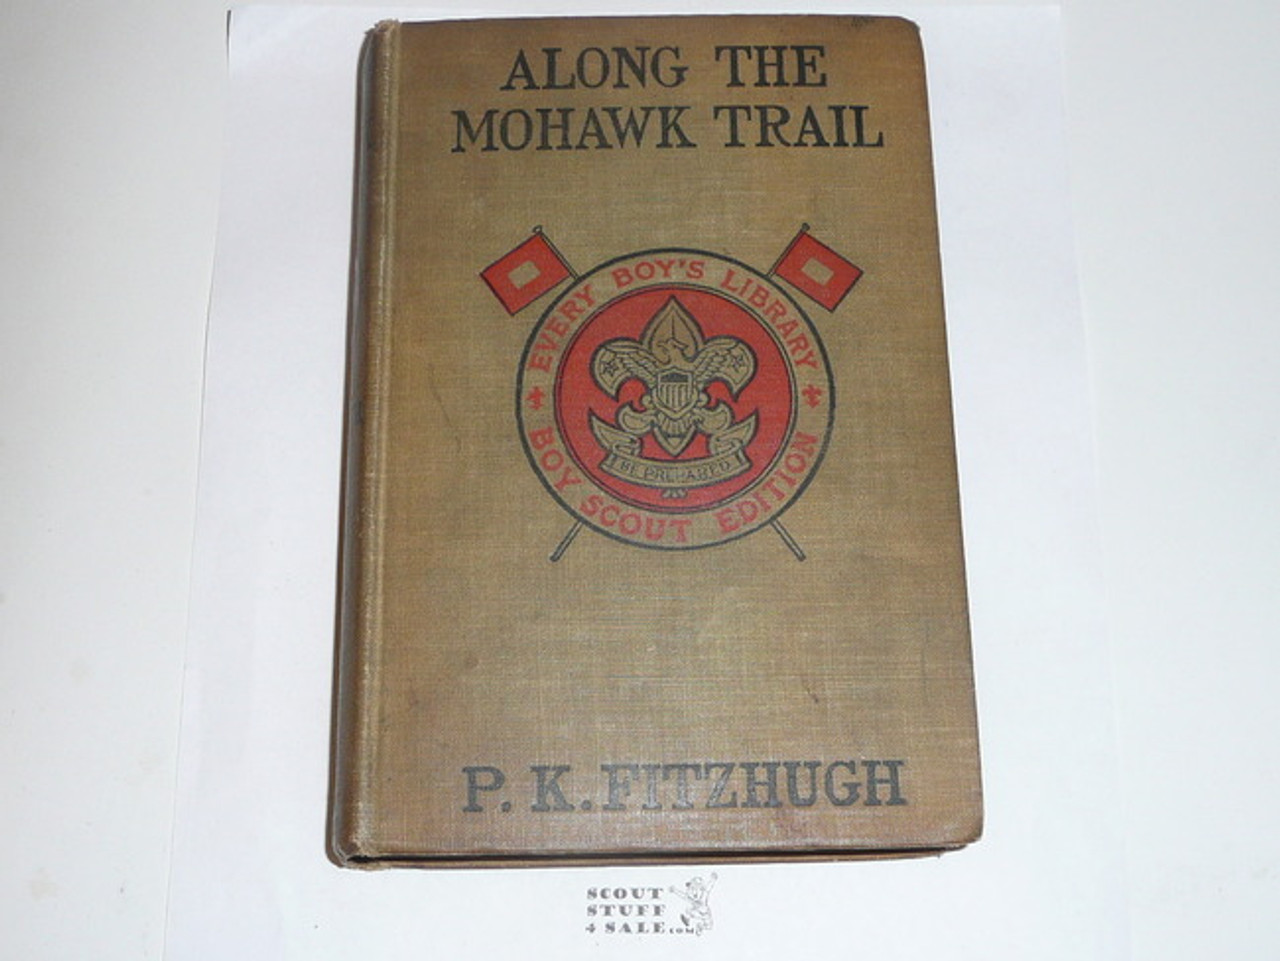 Along the Mohawk Trail, By P.K. Fitzhugh, 1913, Every Boy's Library Edition, Type Two Binding